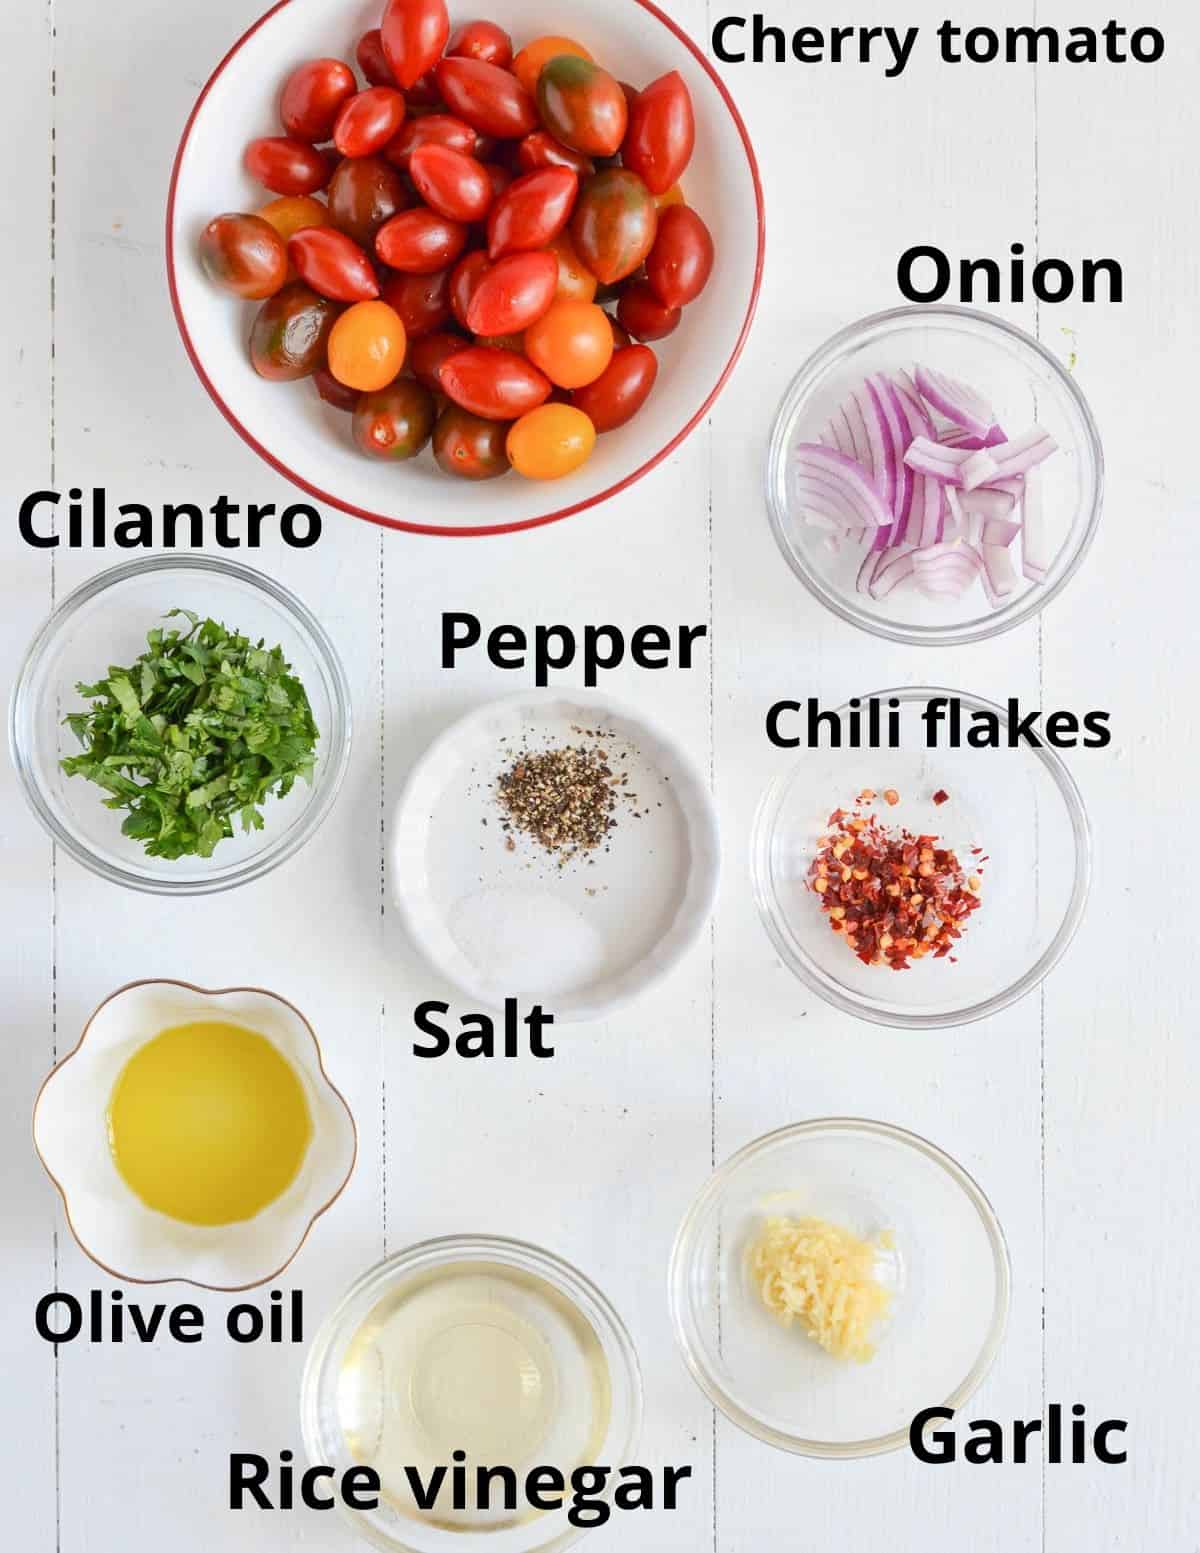 all the ingredients listed to make the dressing & tomato salad on the white board.